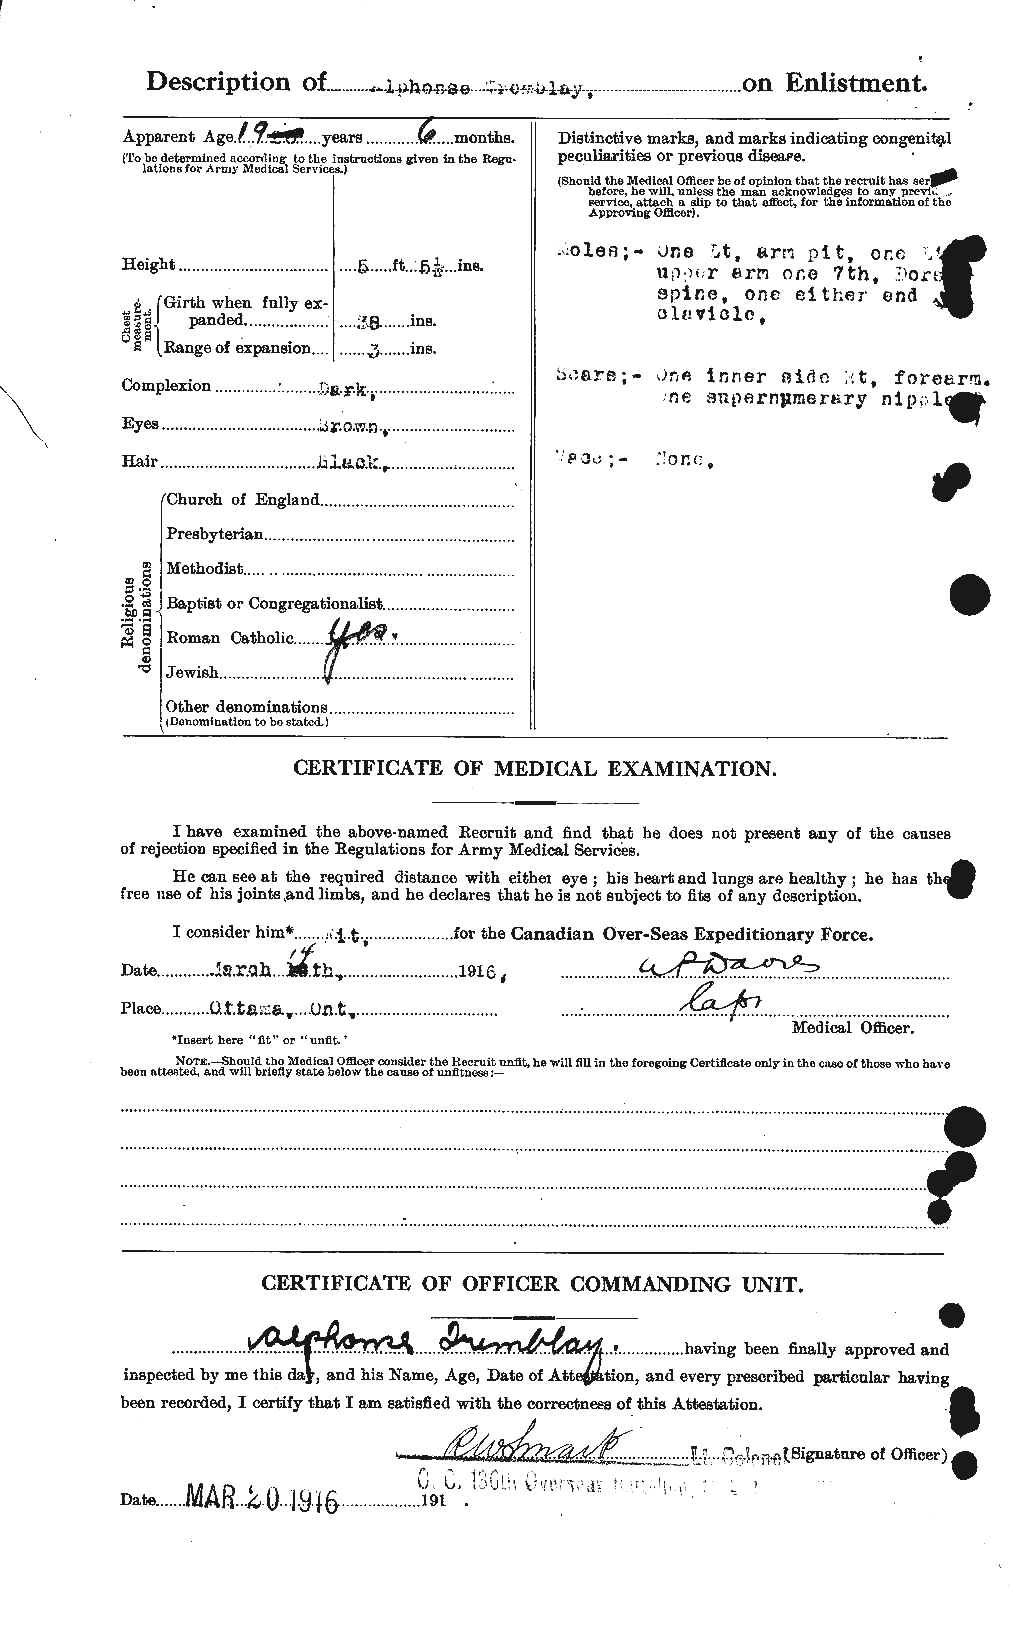 Personnel Records of the First World War - CEF 638930b